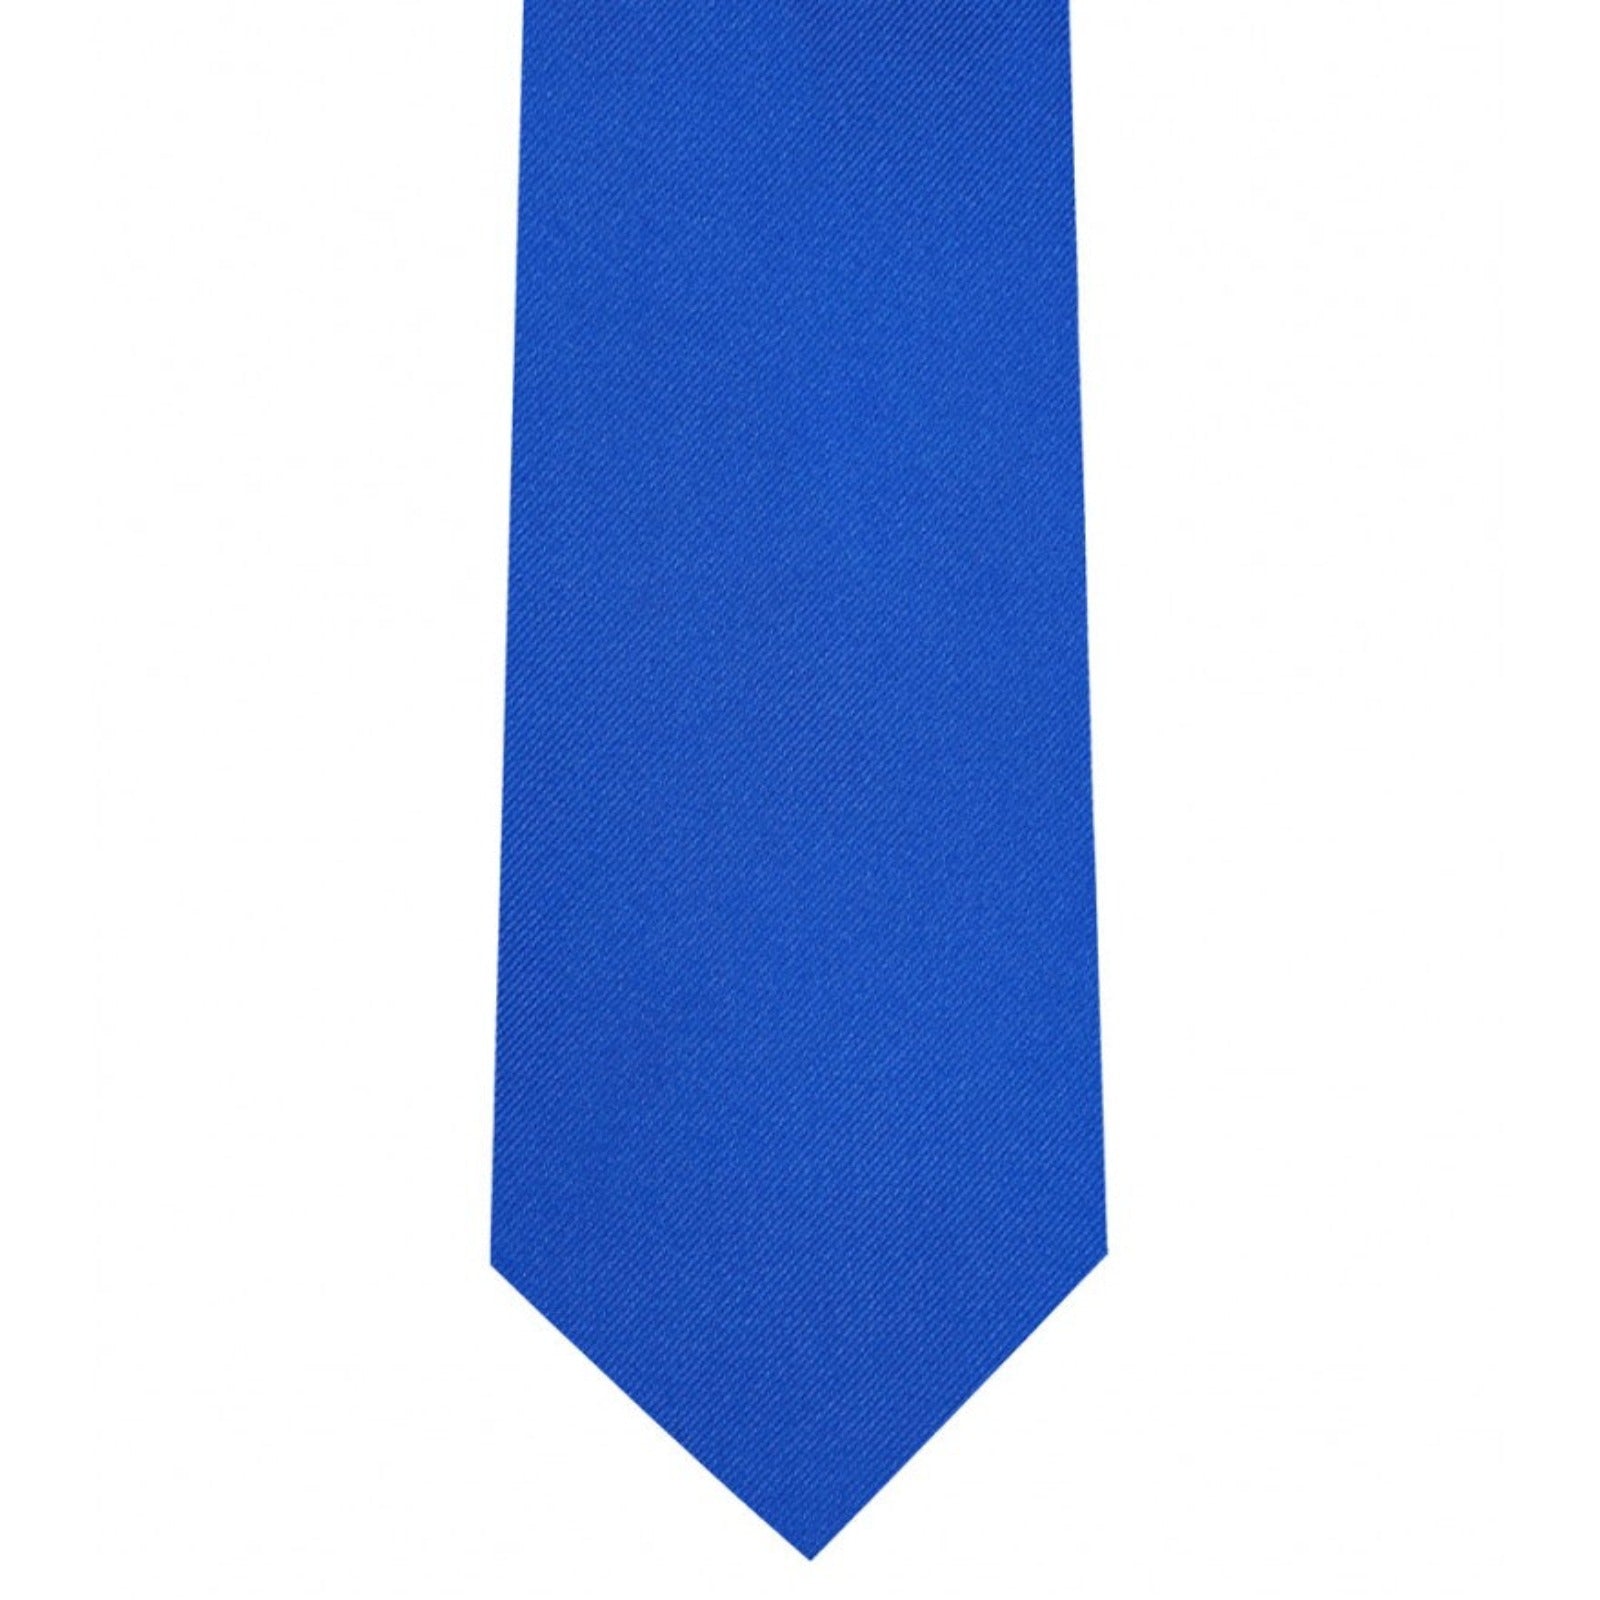 Classic Royal Blue Tie Ultra Skinny tie width 2.25 inches With Matching Pocket Square | KCT Menswear